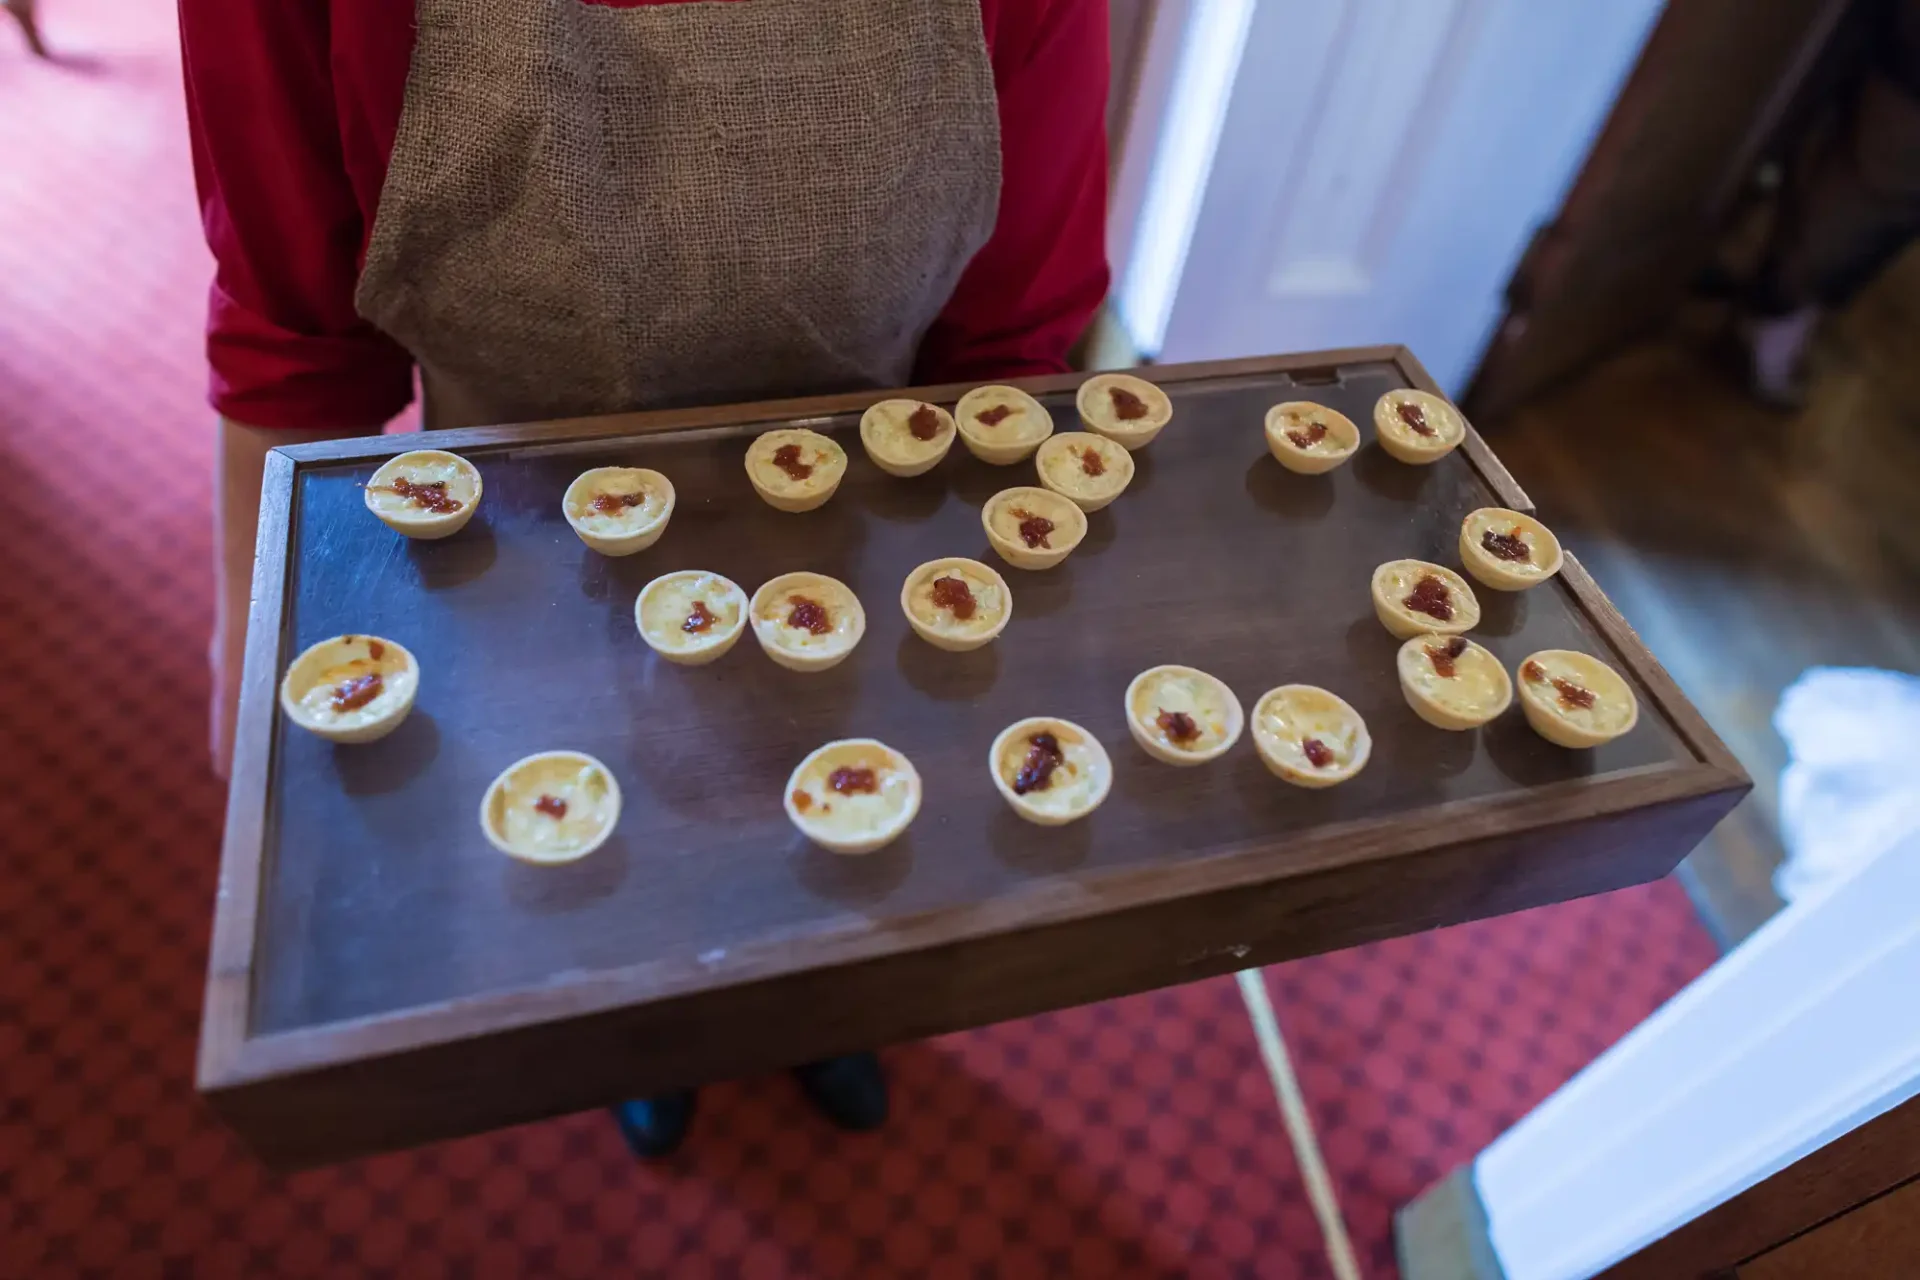 A person holding a wooden tray filled with small, open-faced tarts in a room with a red carpet.